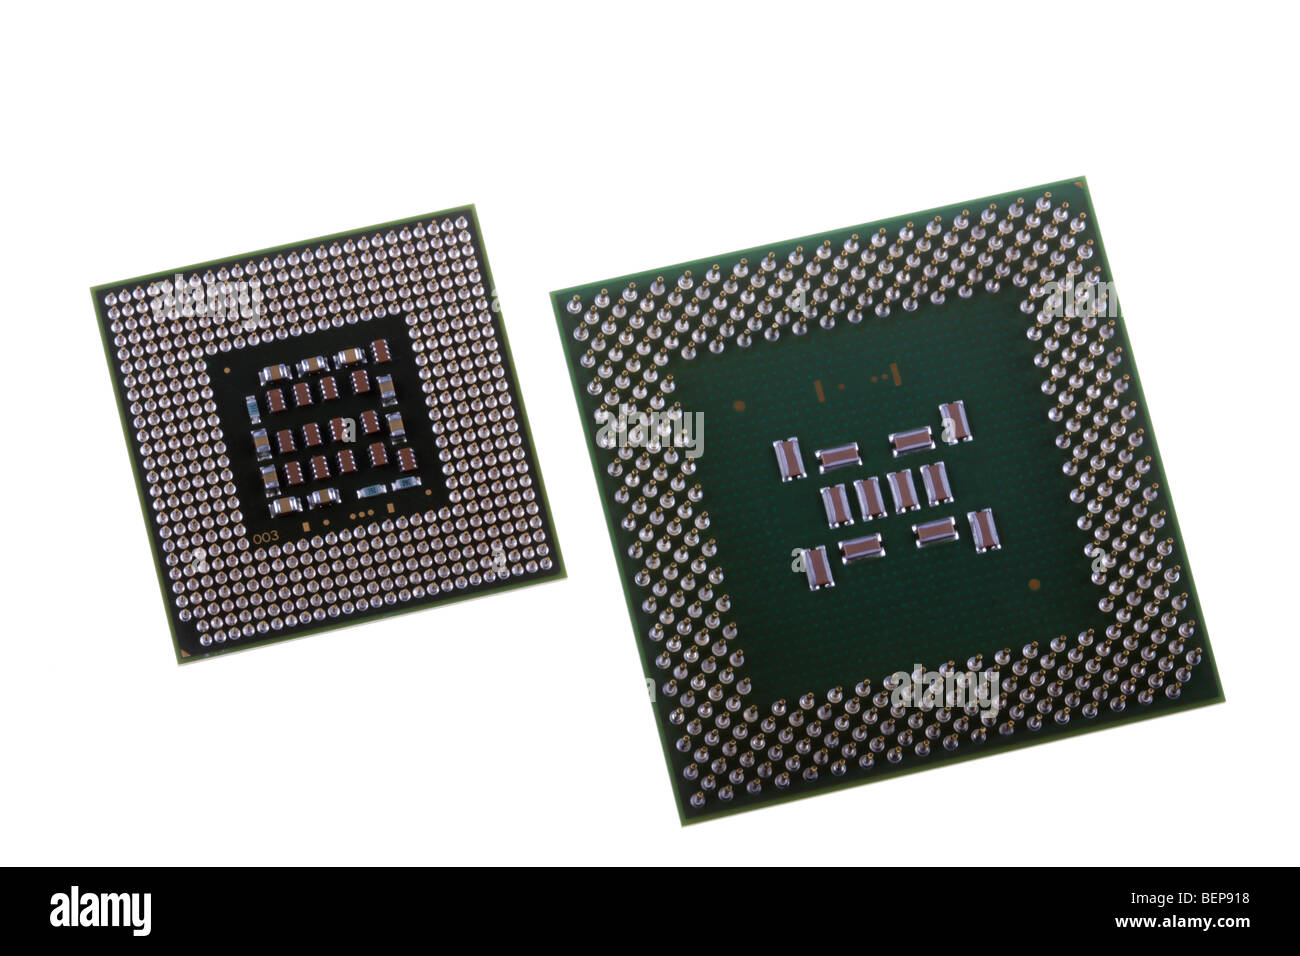 One old and one modern computer central processors. Stock Photo